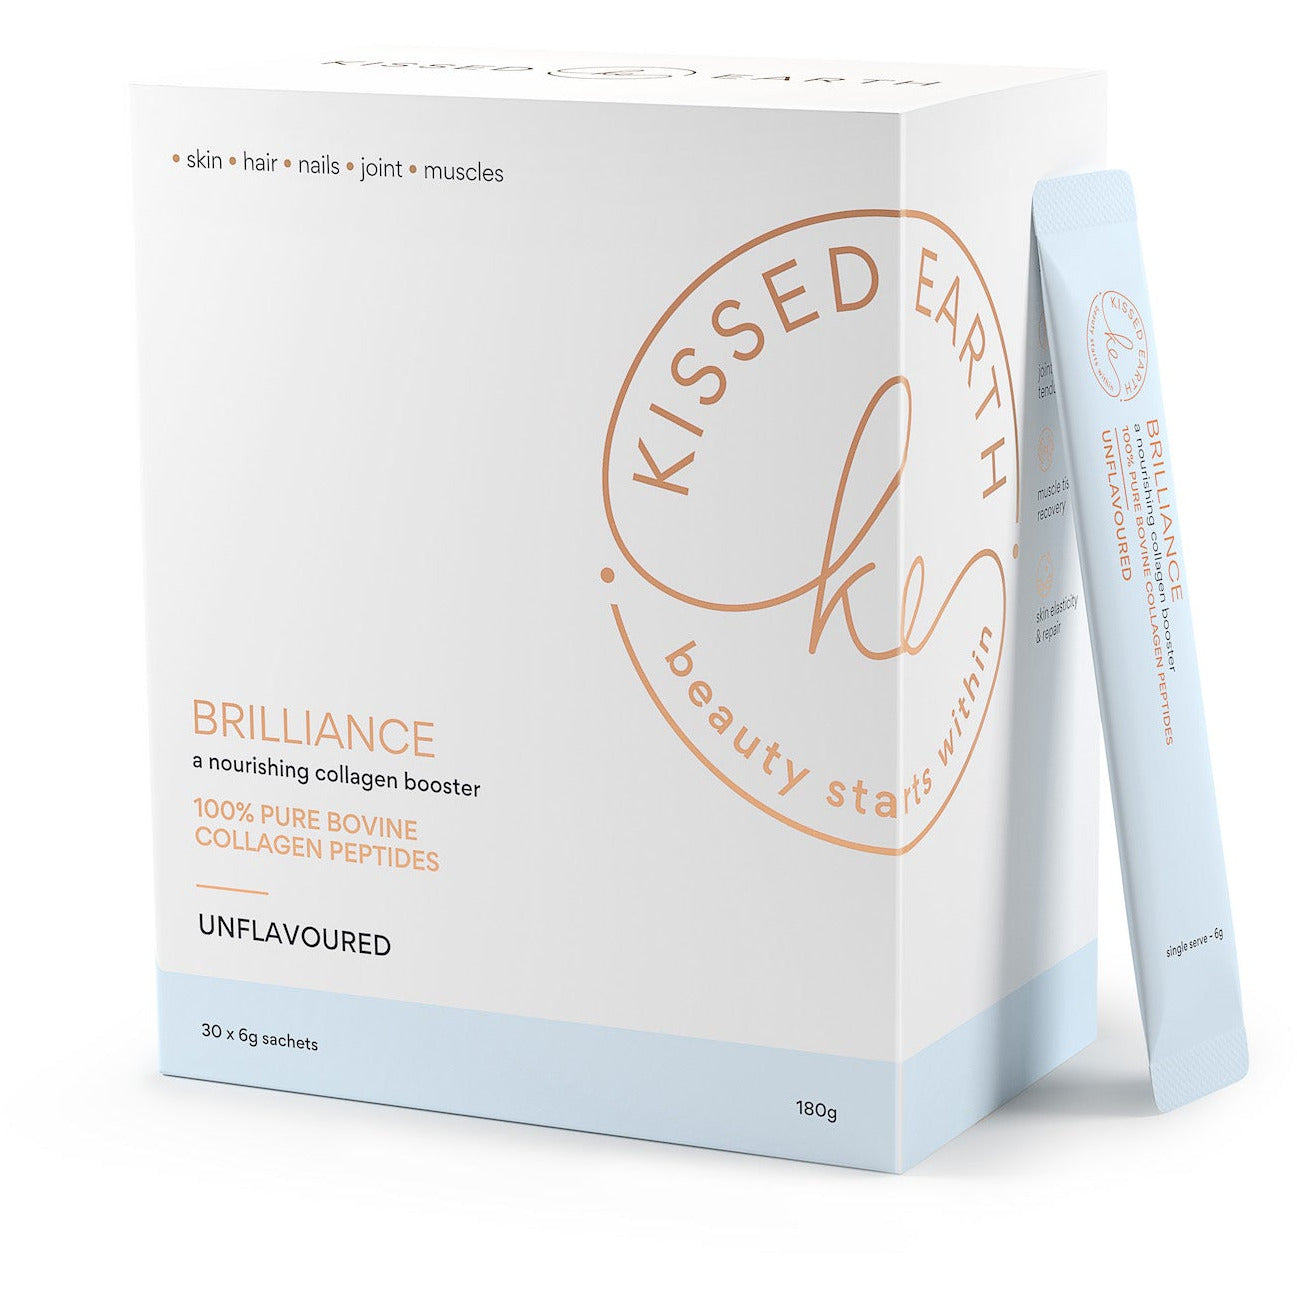 Kissed Earth Brilliance 100% Bovine Collagen Peptides Unflavoured 6000mg hydrolysed collagen per sachet